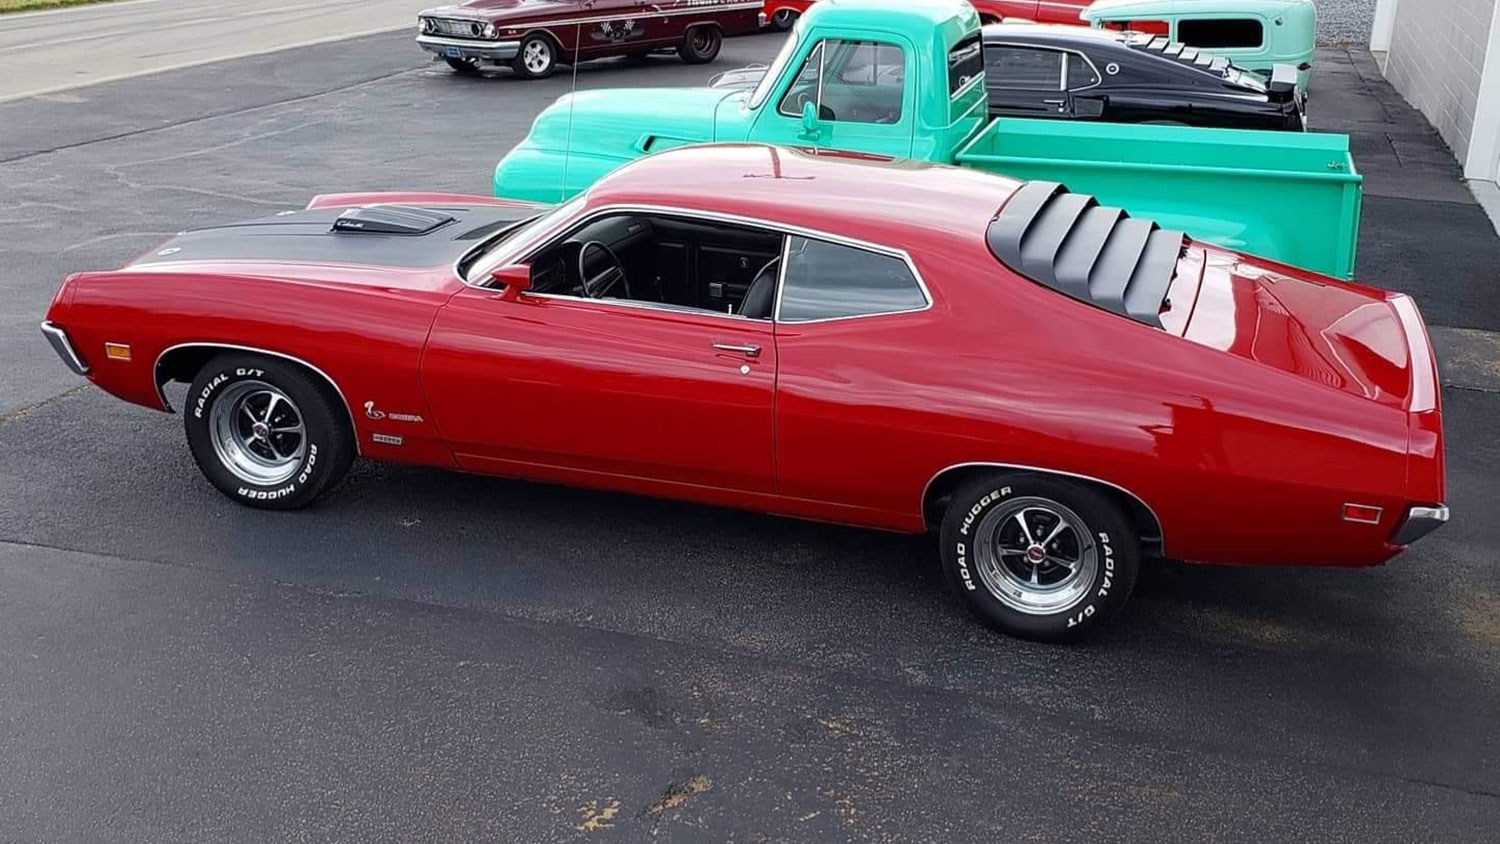 Classic Ford Torino for Sale on